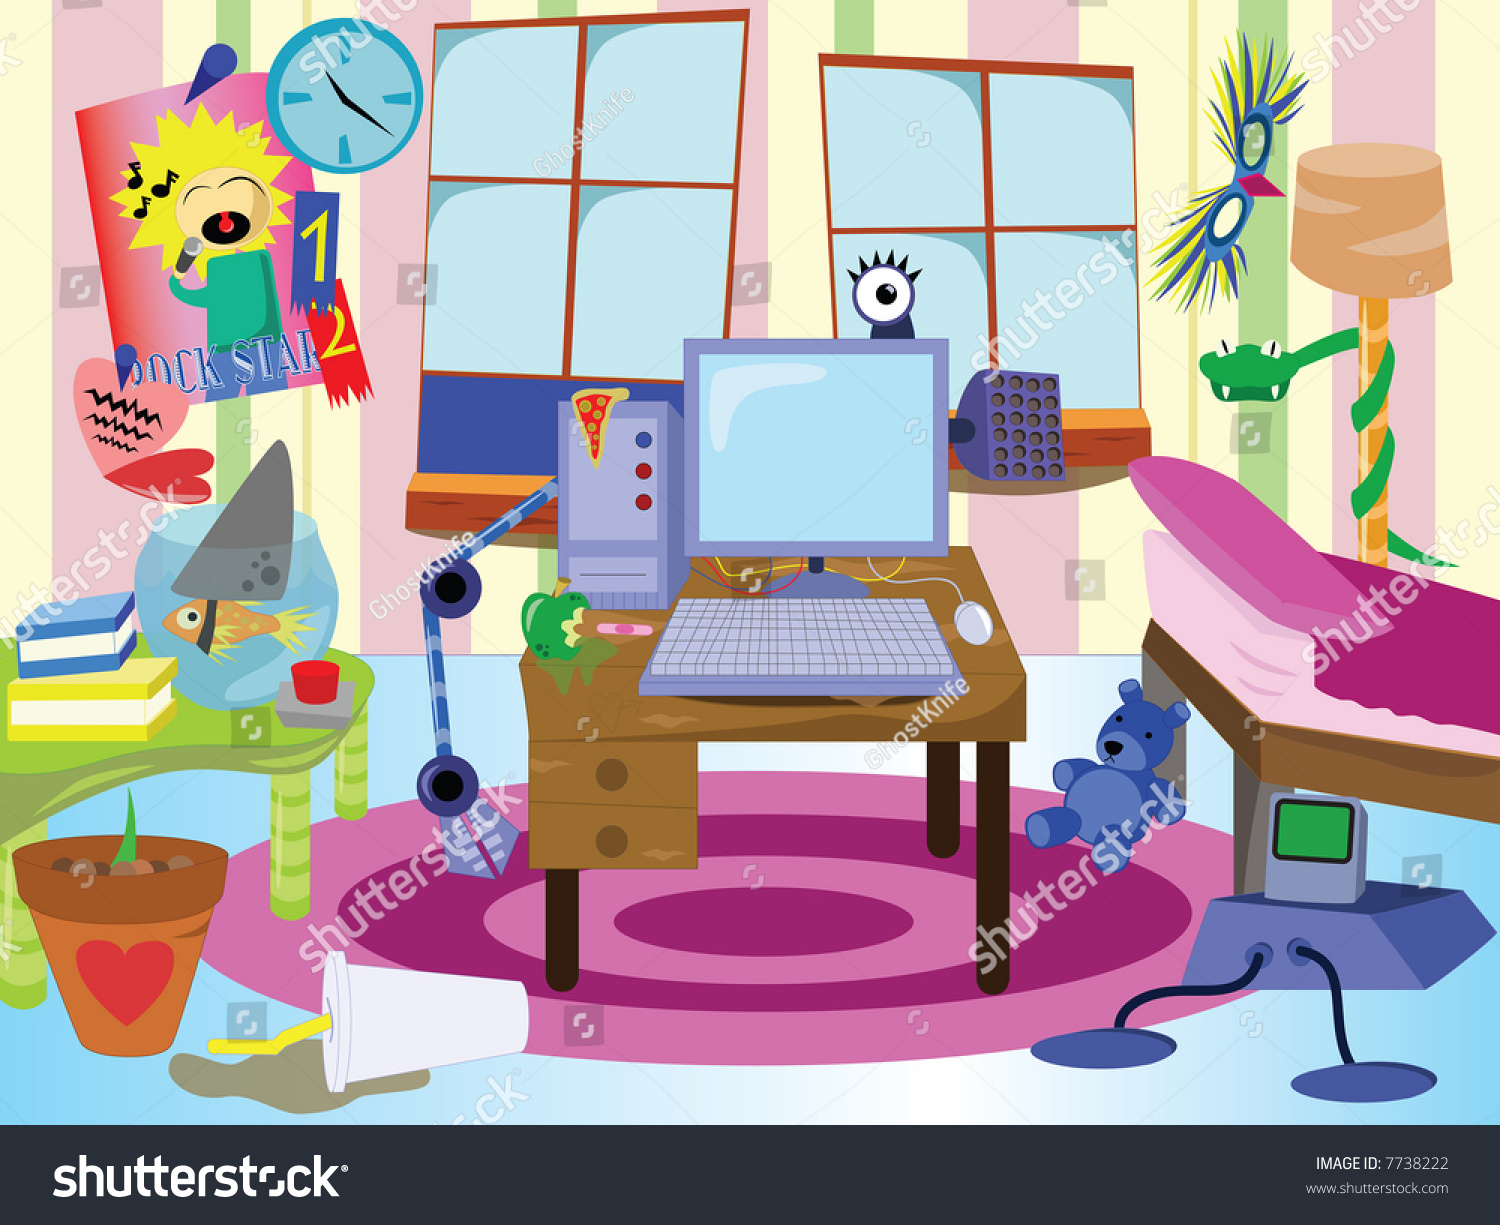 messy house clipart - photo #19